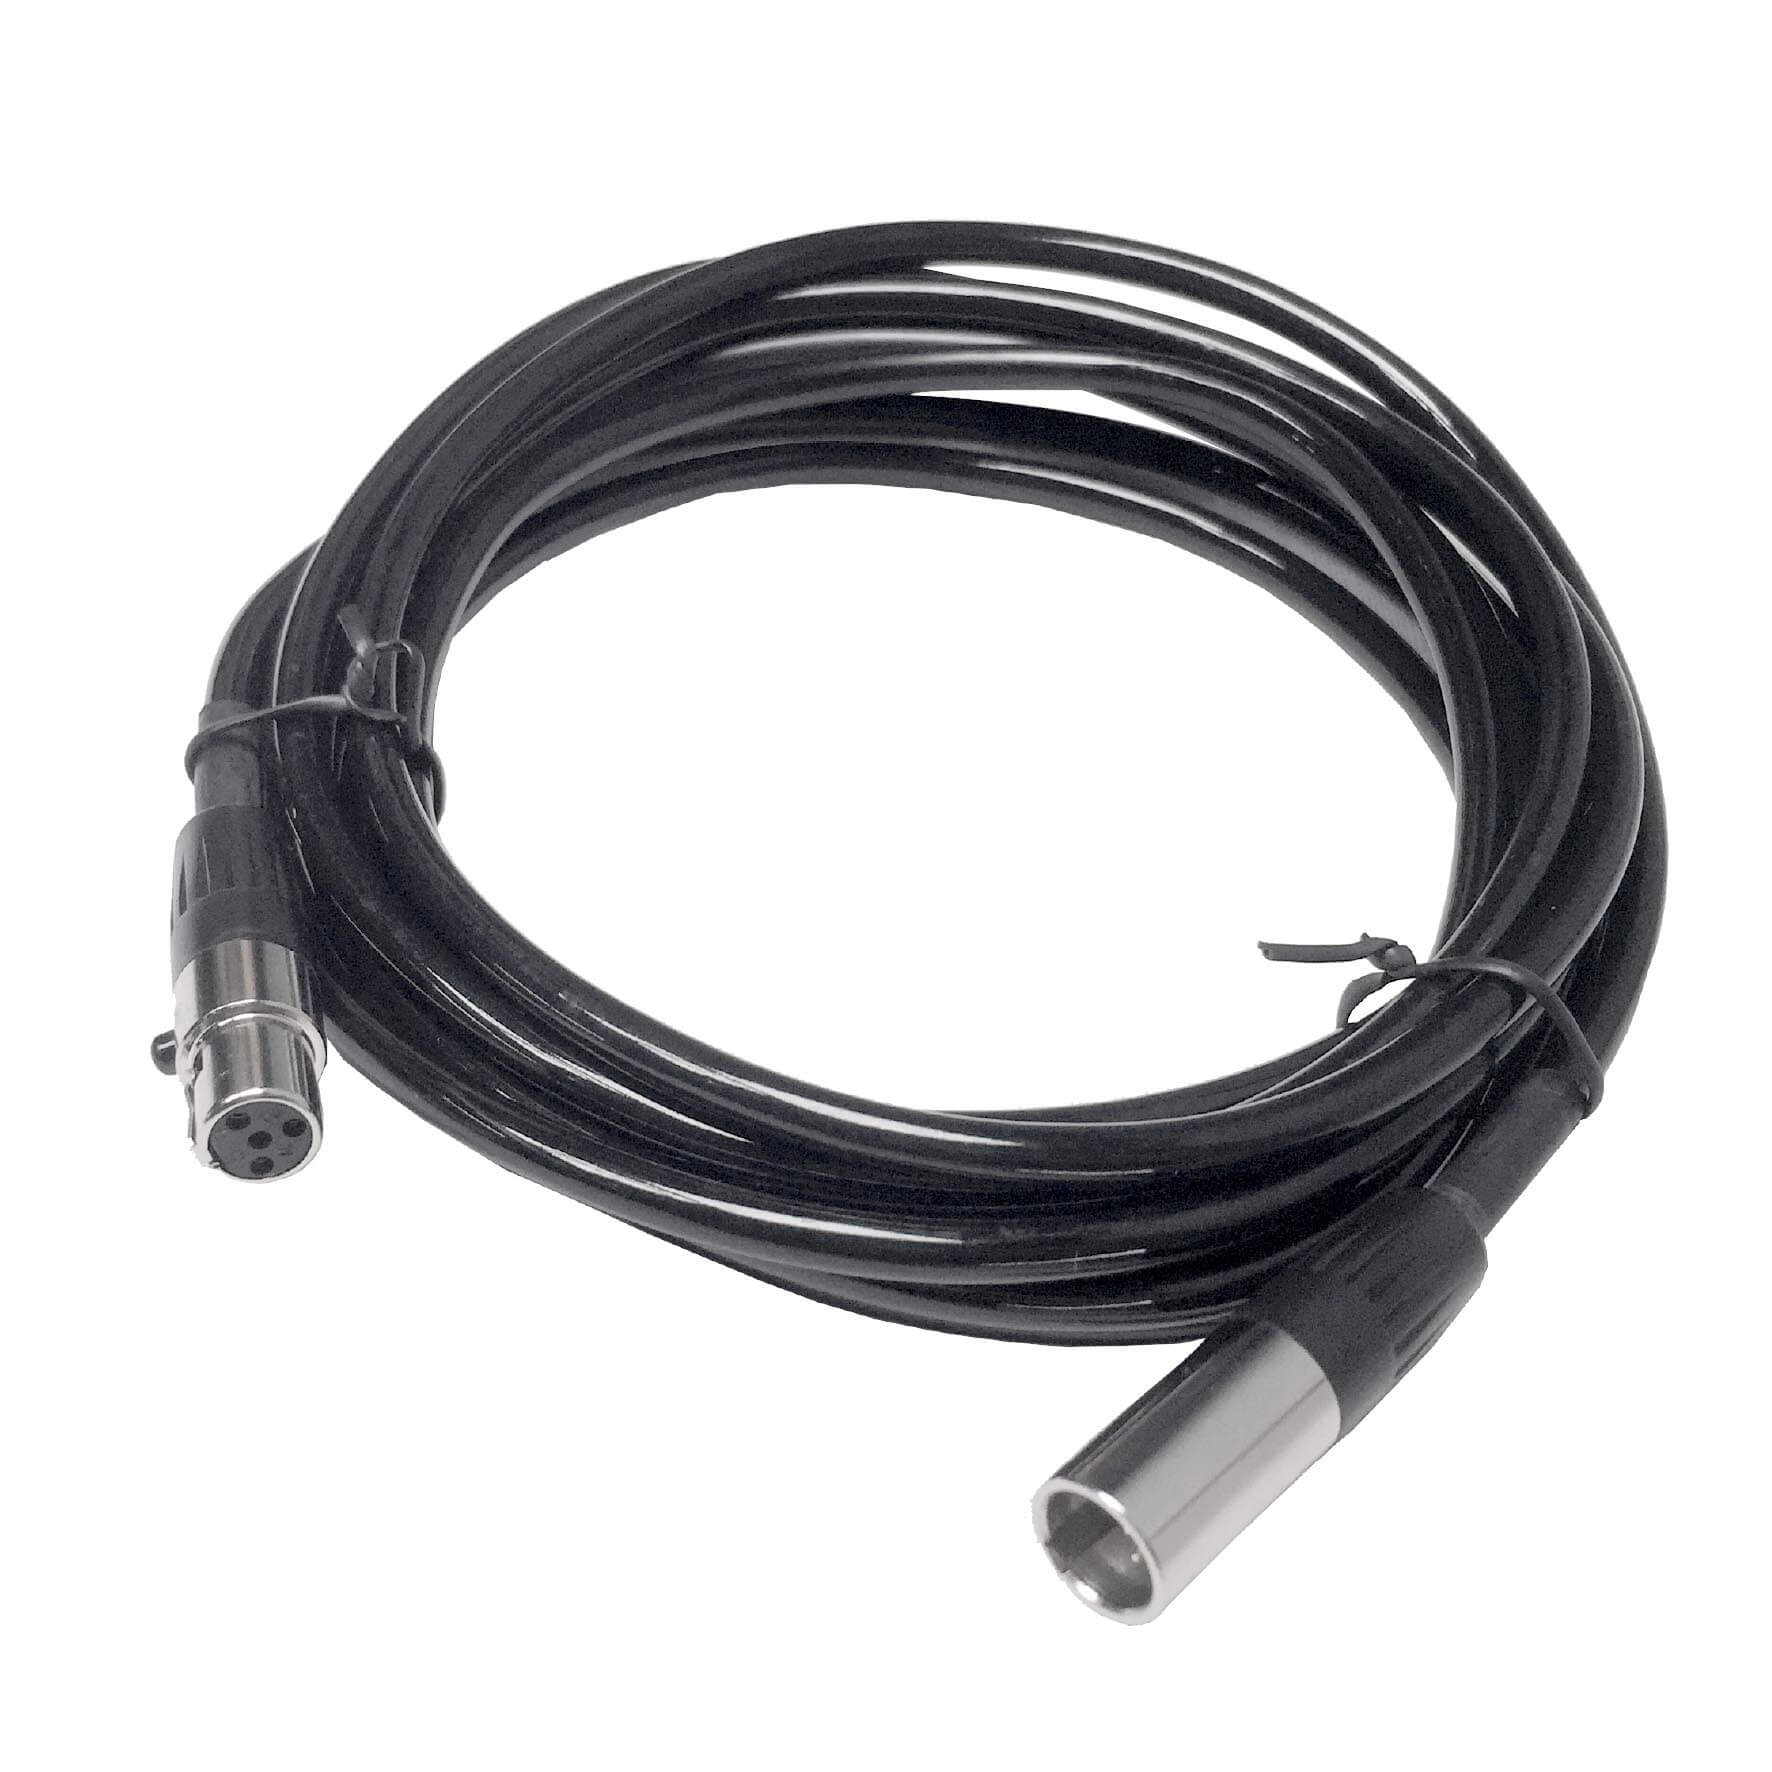 1.5m 4-Pin Extension Cable for LENNO256 Flexible LED Panel 